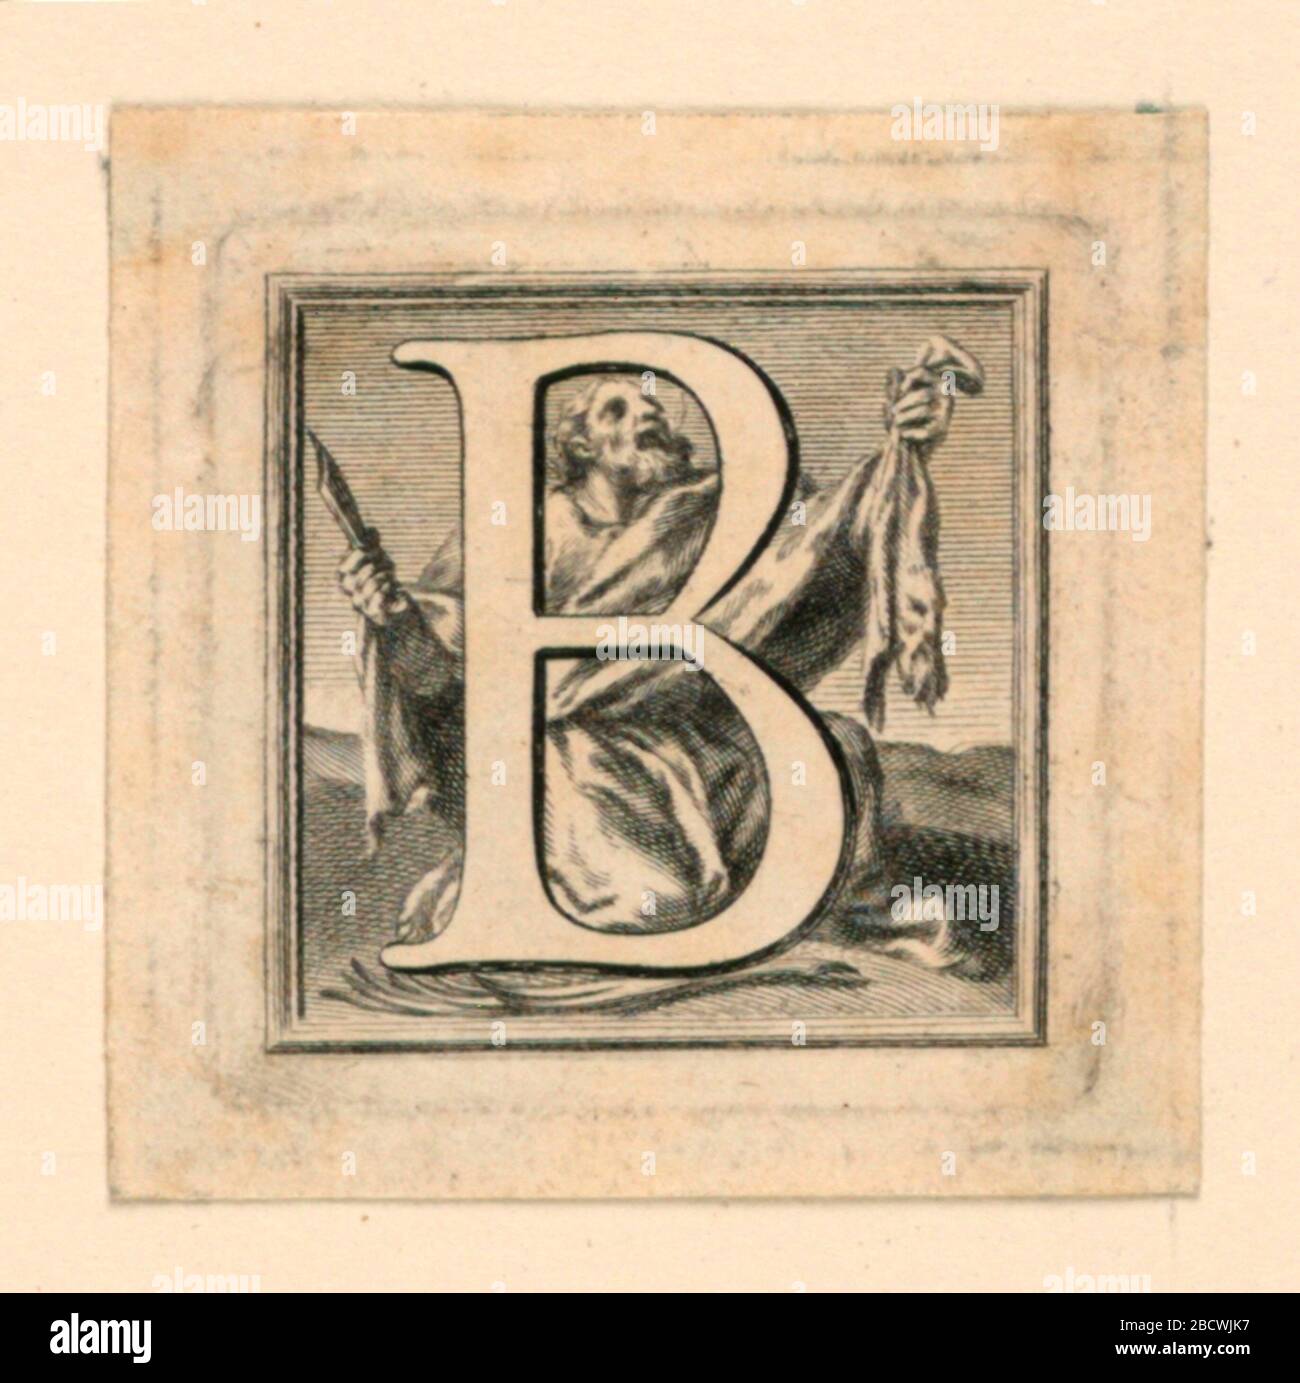 Decorated Capital Letter B. Research in ProgressLetter 'B' standing before St. Bartholomew, who kneels, carrying knife and skin. Decorated Capital Letter B Stock Photo